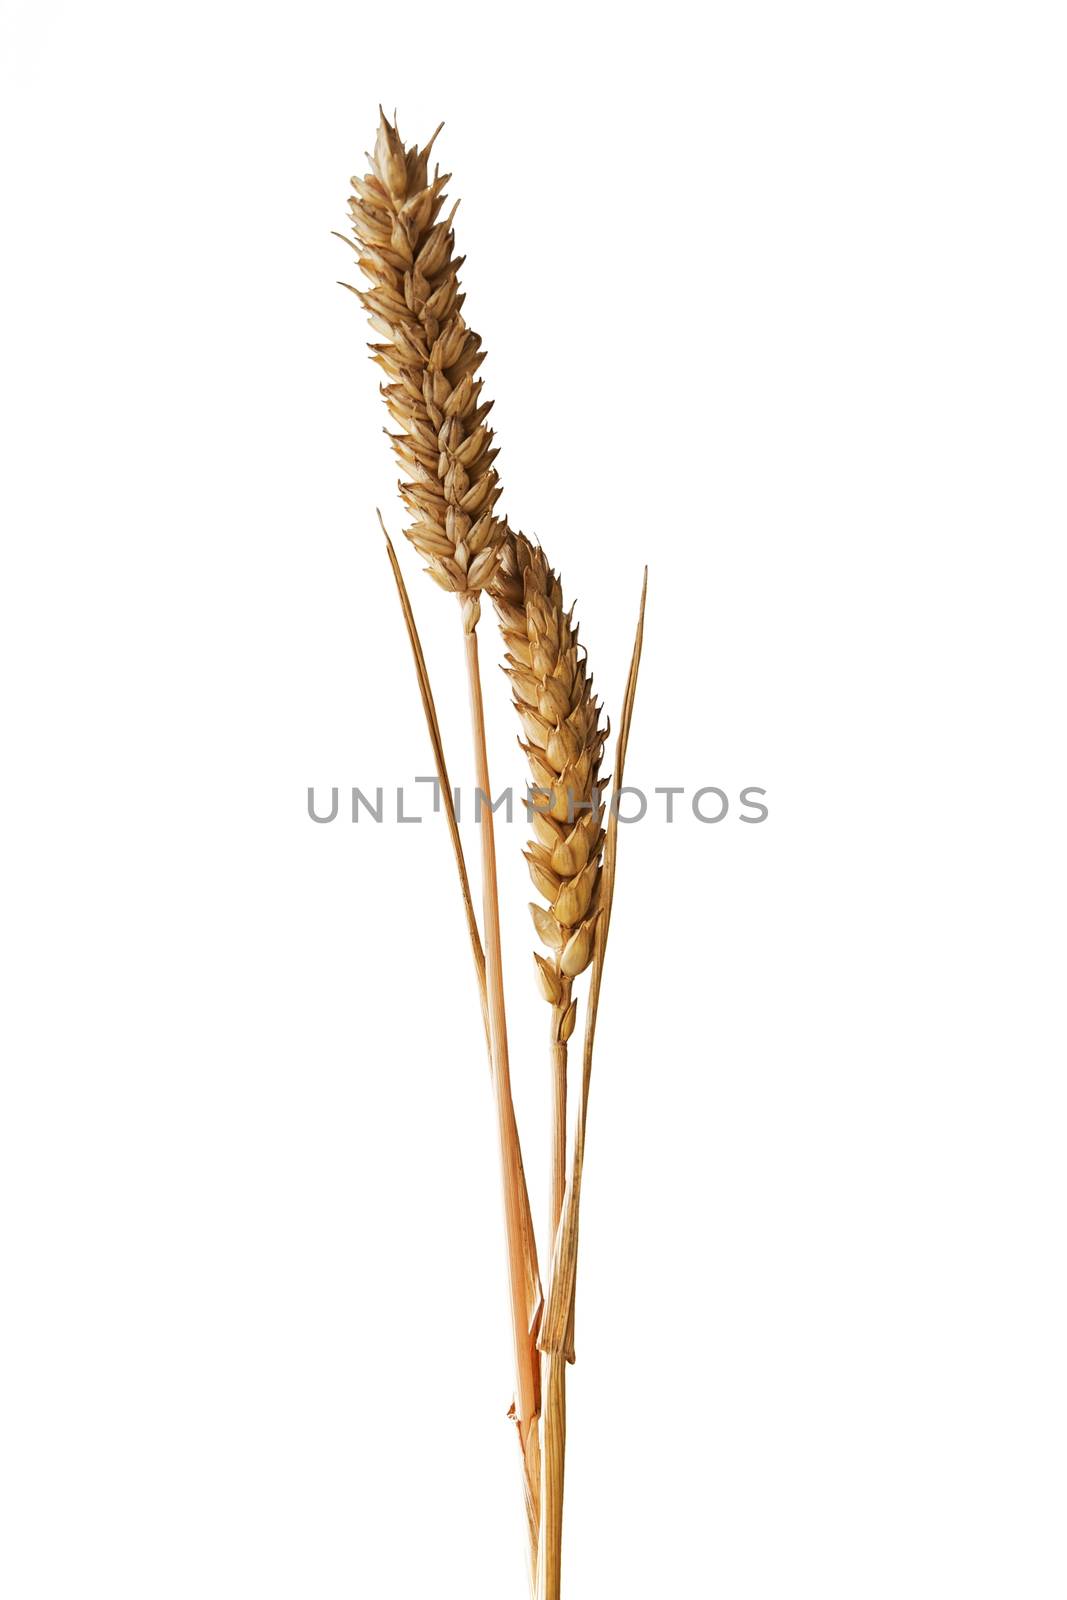 Golden wheat isolated on white background.